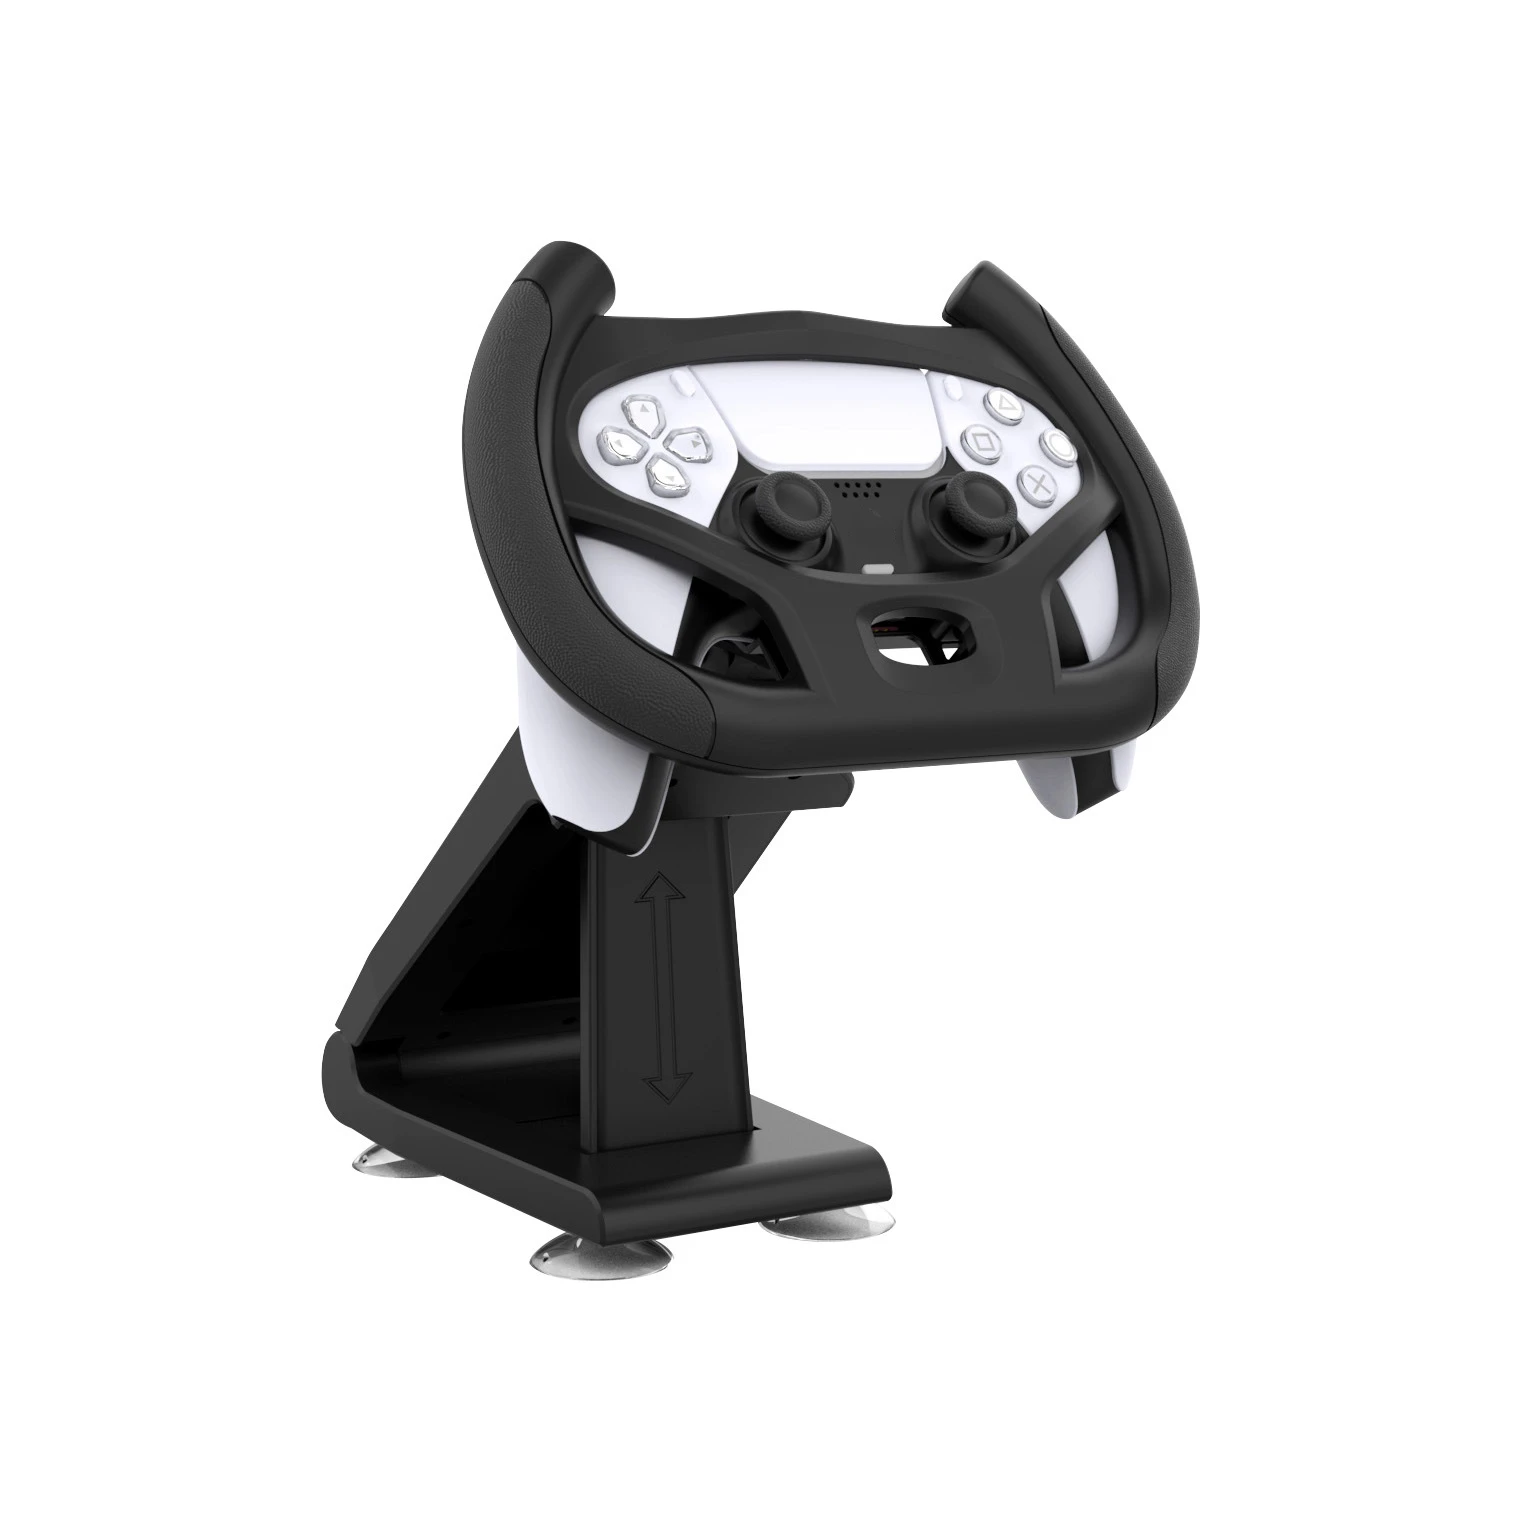 

Multi Axis Steering Wheel Races Gaming Handle Holder for PS5 Racing Game Handle Bracket for PlayStation 5 Accessories